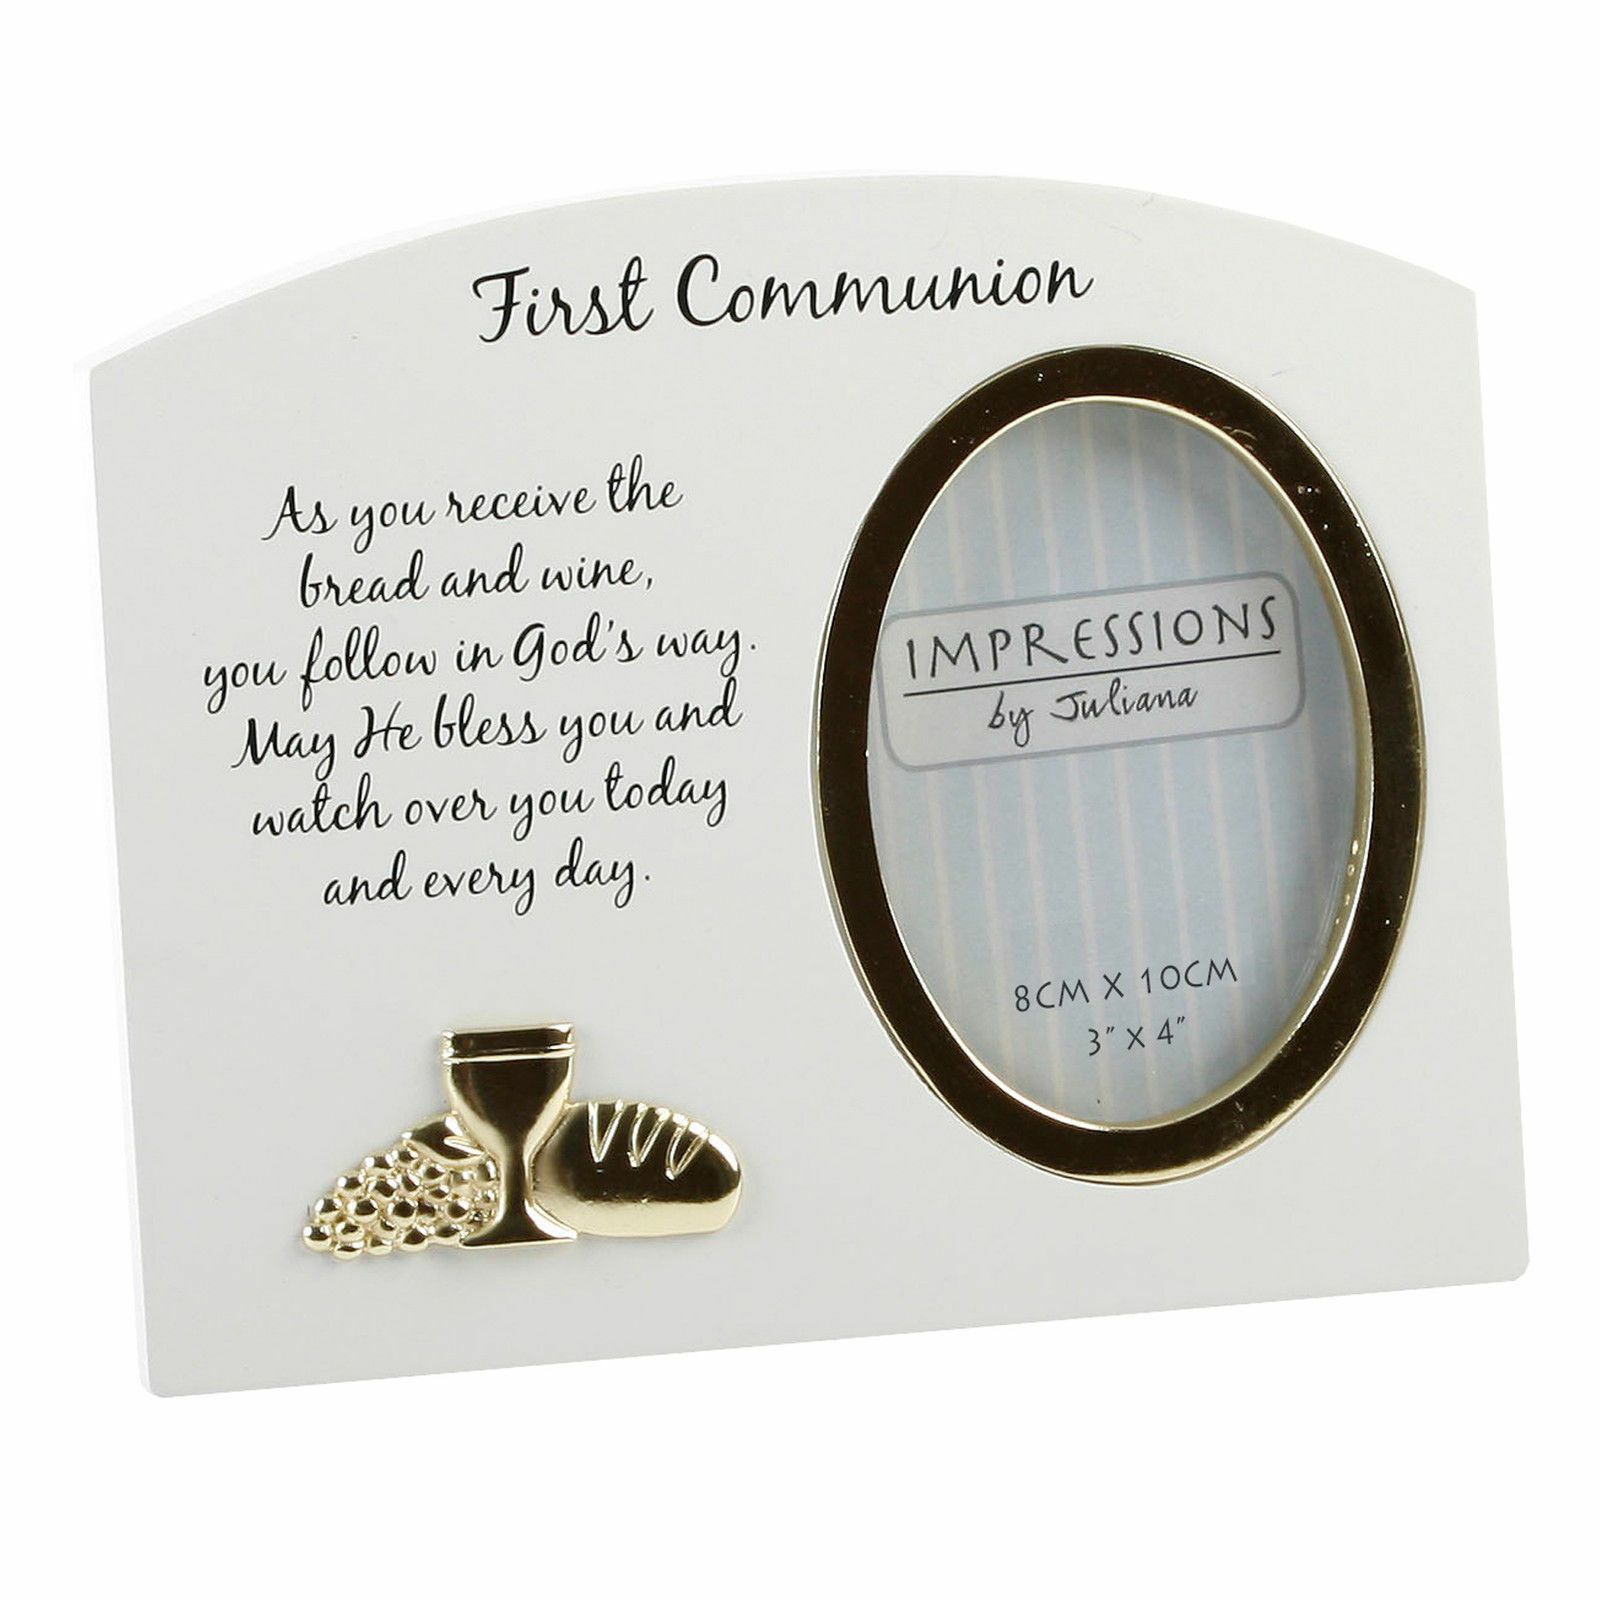 First Communion White Gold Photo Frame - A & M News and Gifts